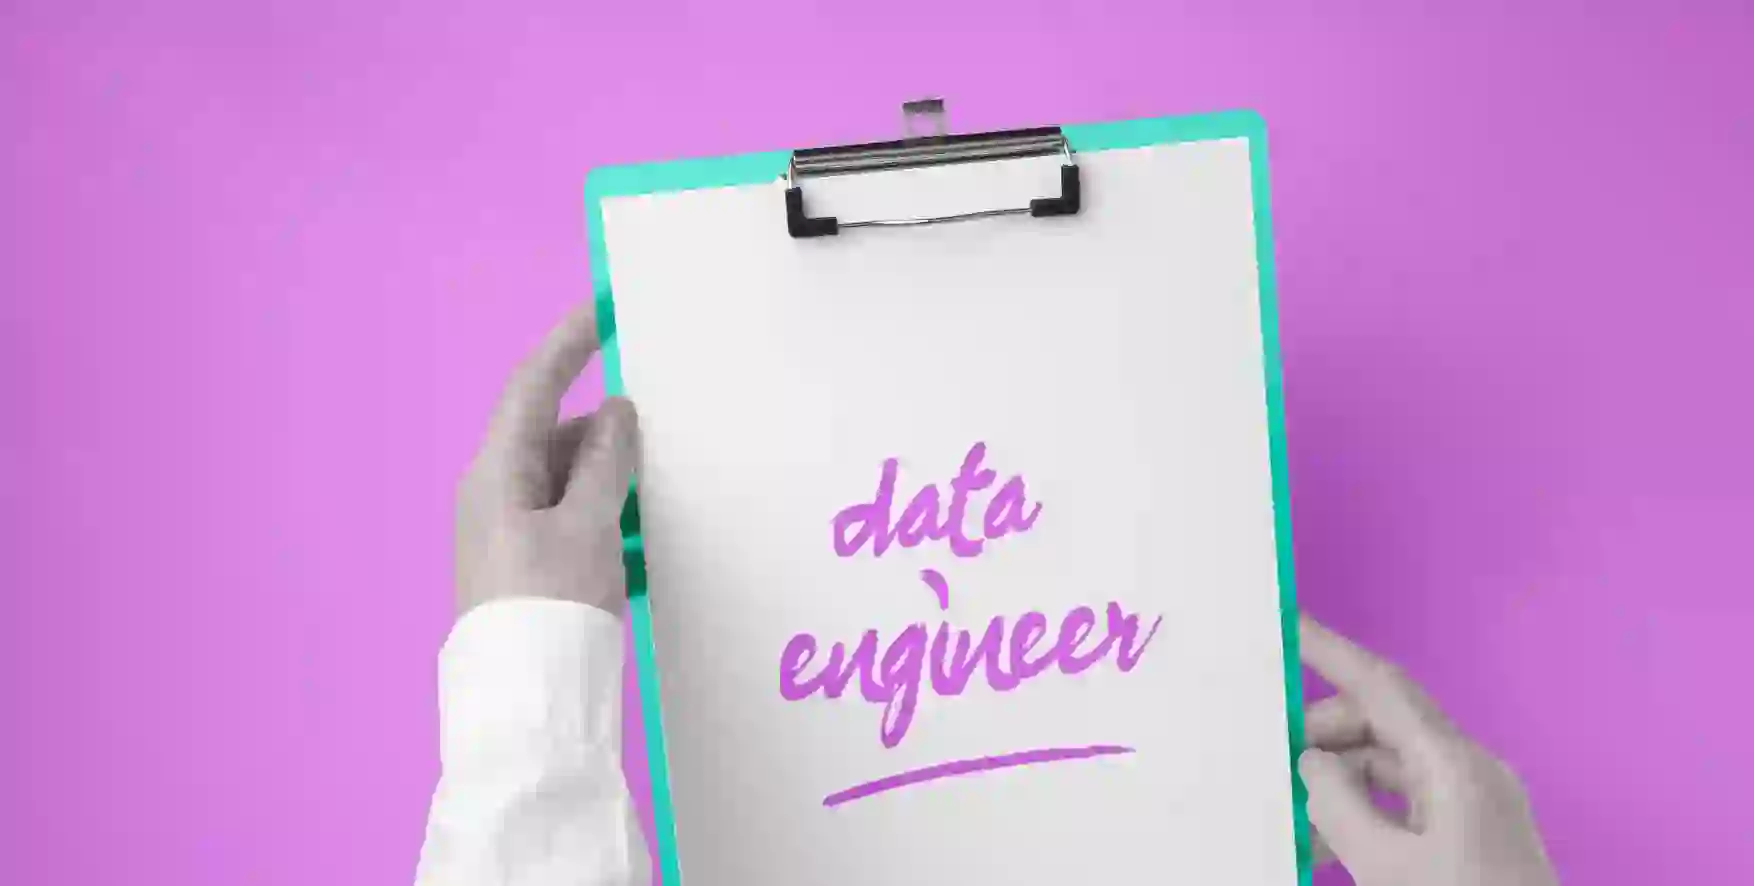 data engineer written on a piece of paper in a clipboard